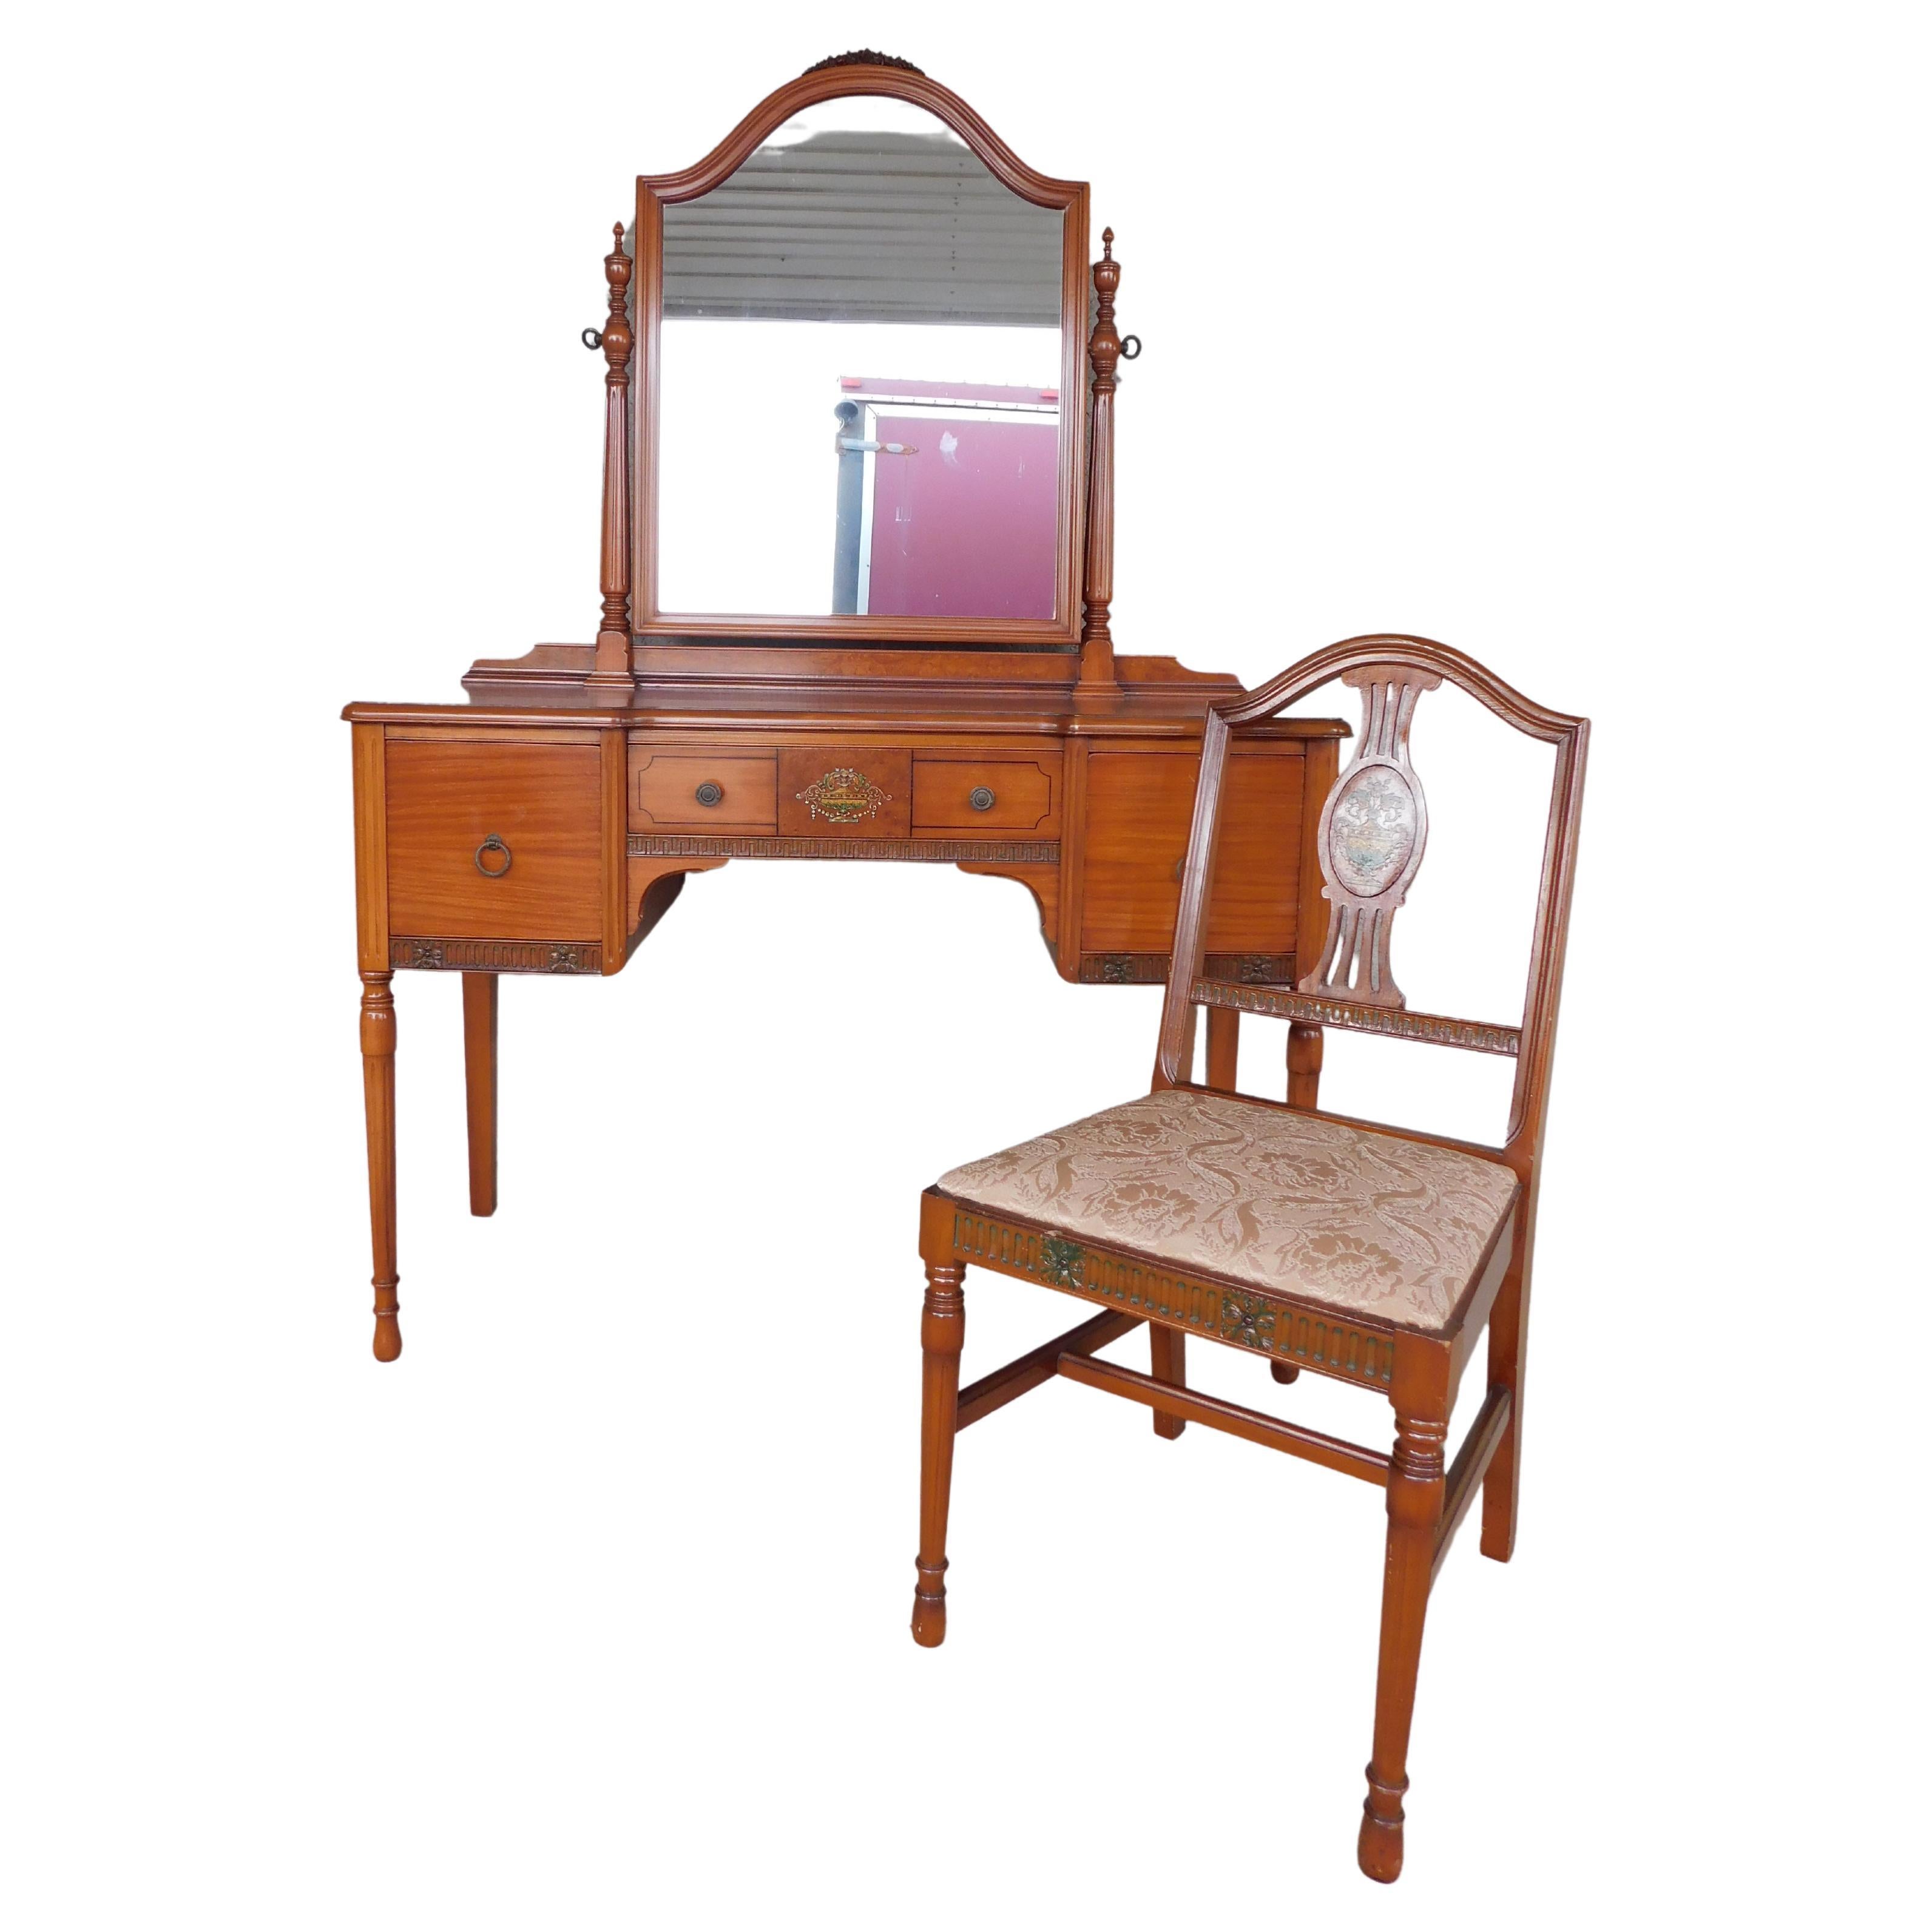 Antique Adams / Regency Style Satinwood Vanity with Chair & Bench
Medium Tone Finished Satinwood, Greek Key Accented with Pencil Inlays surrounding the drawer face,, and Painted Centered Burl Walnut Veneer with Hand Painted Urn Motif, Attached